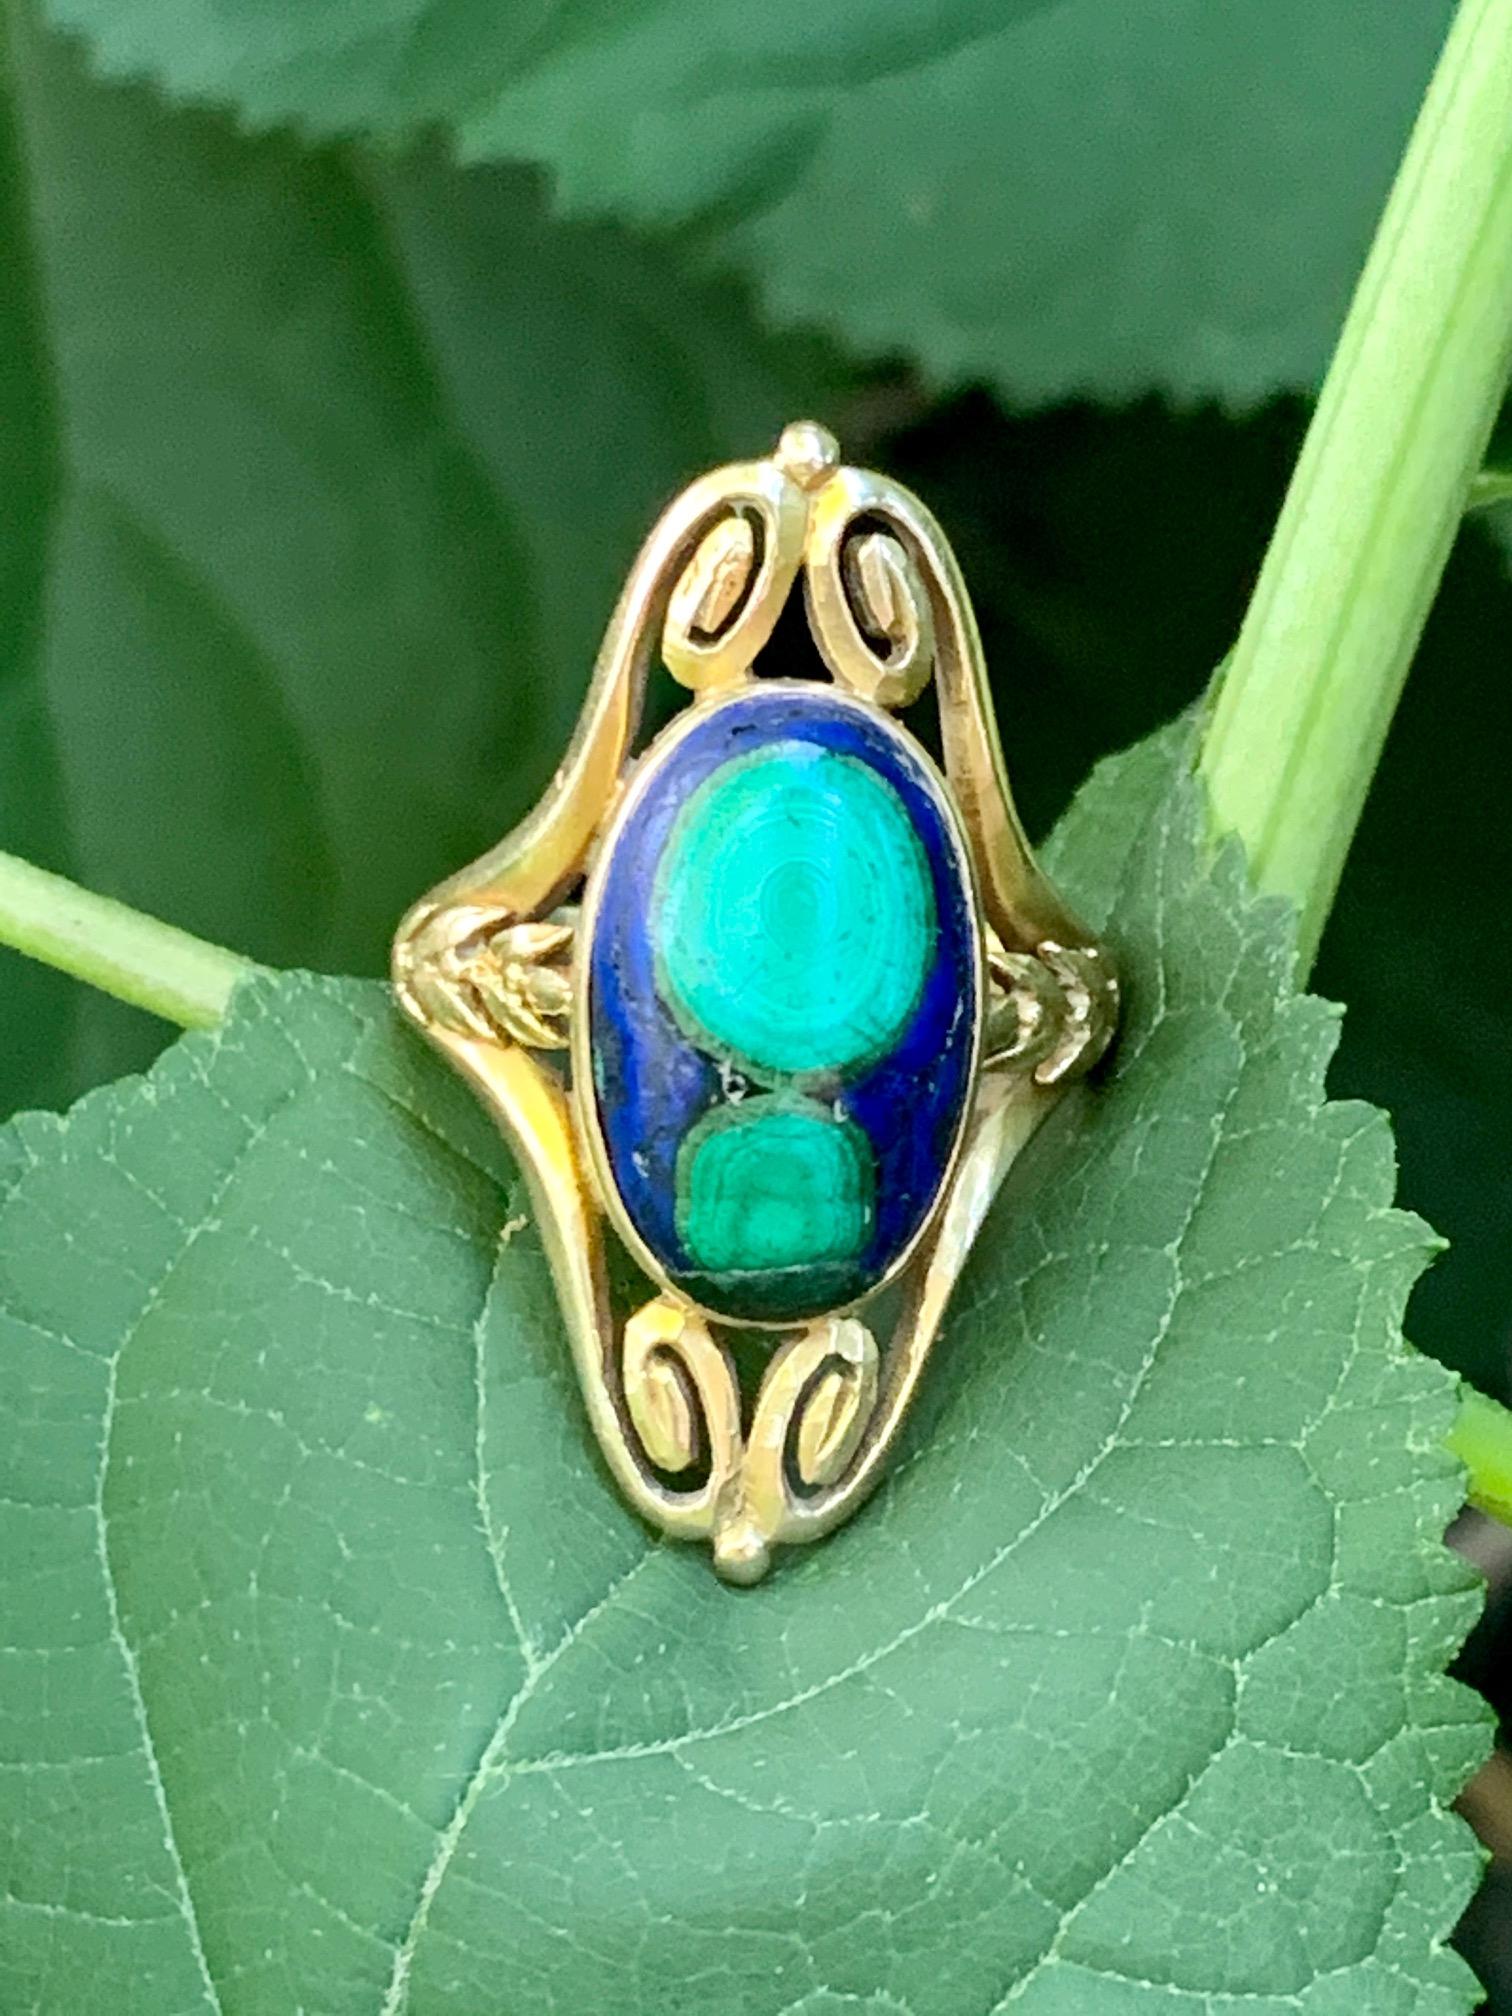 This Art Nouveau ring features an incredible Azurite Malachite Cabochon 16 x 11mm stone.   The stone does have some wear.

Size 6 3/4  - this ring is resizable but vendor does not offer sizing services. 
Weight; 7.69 grams